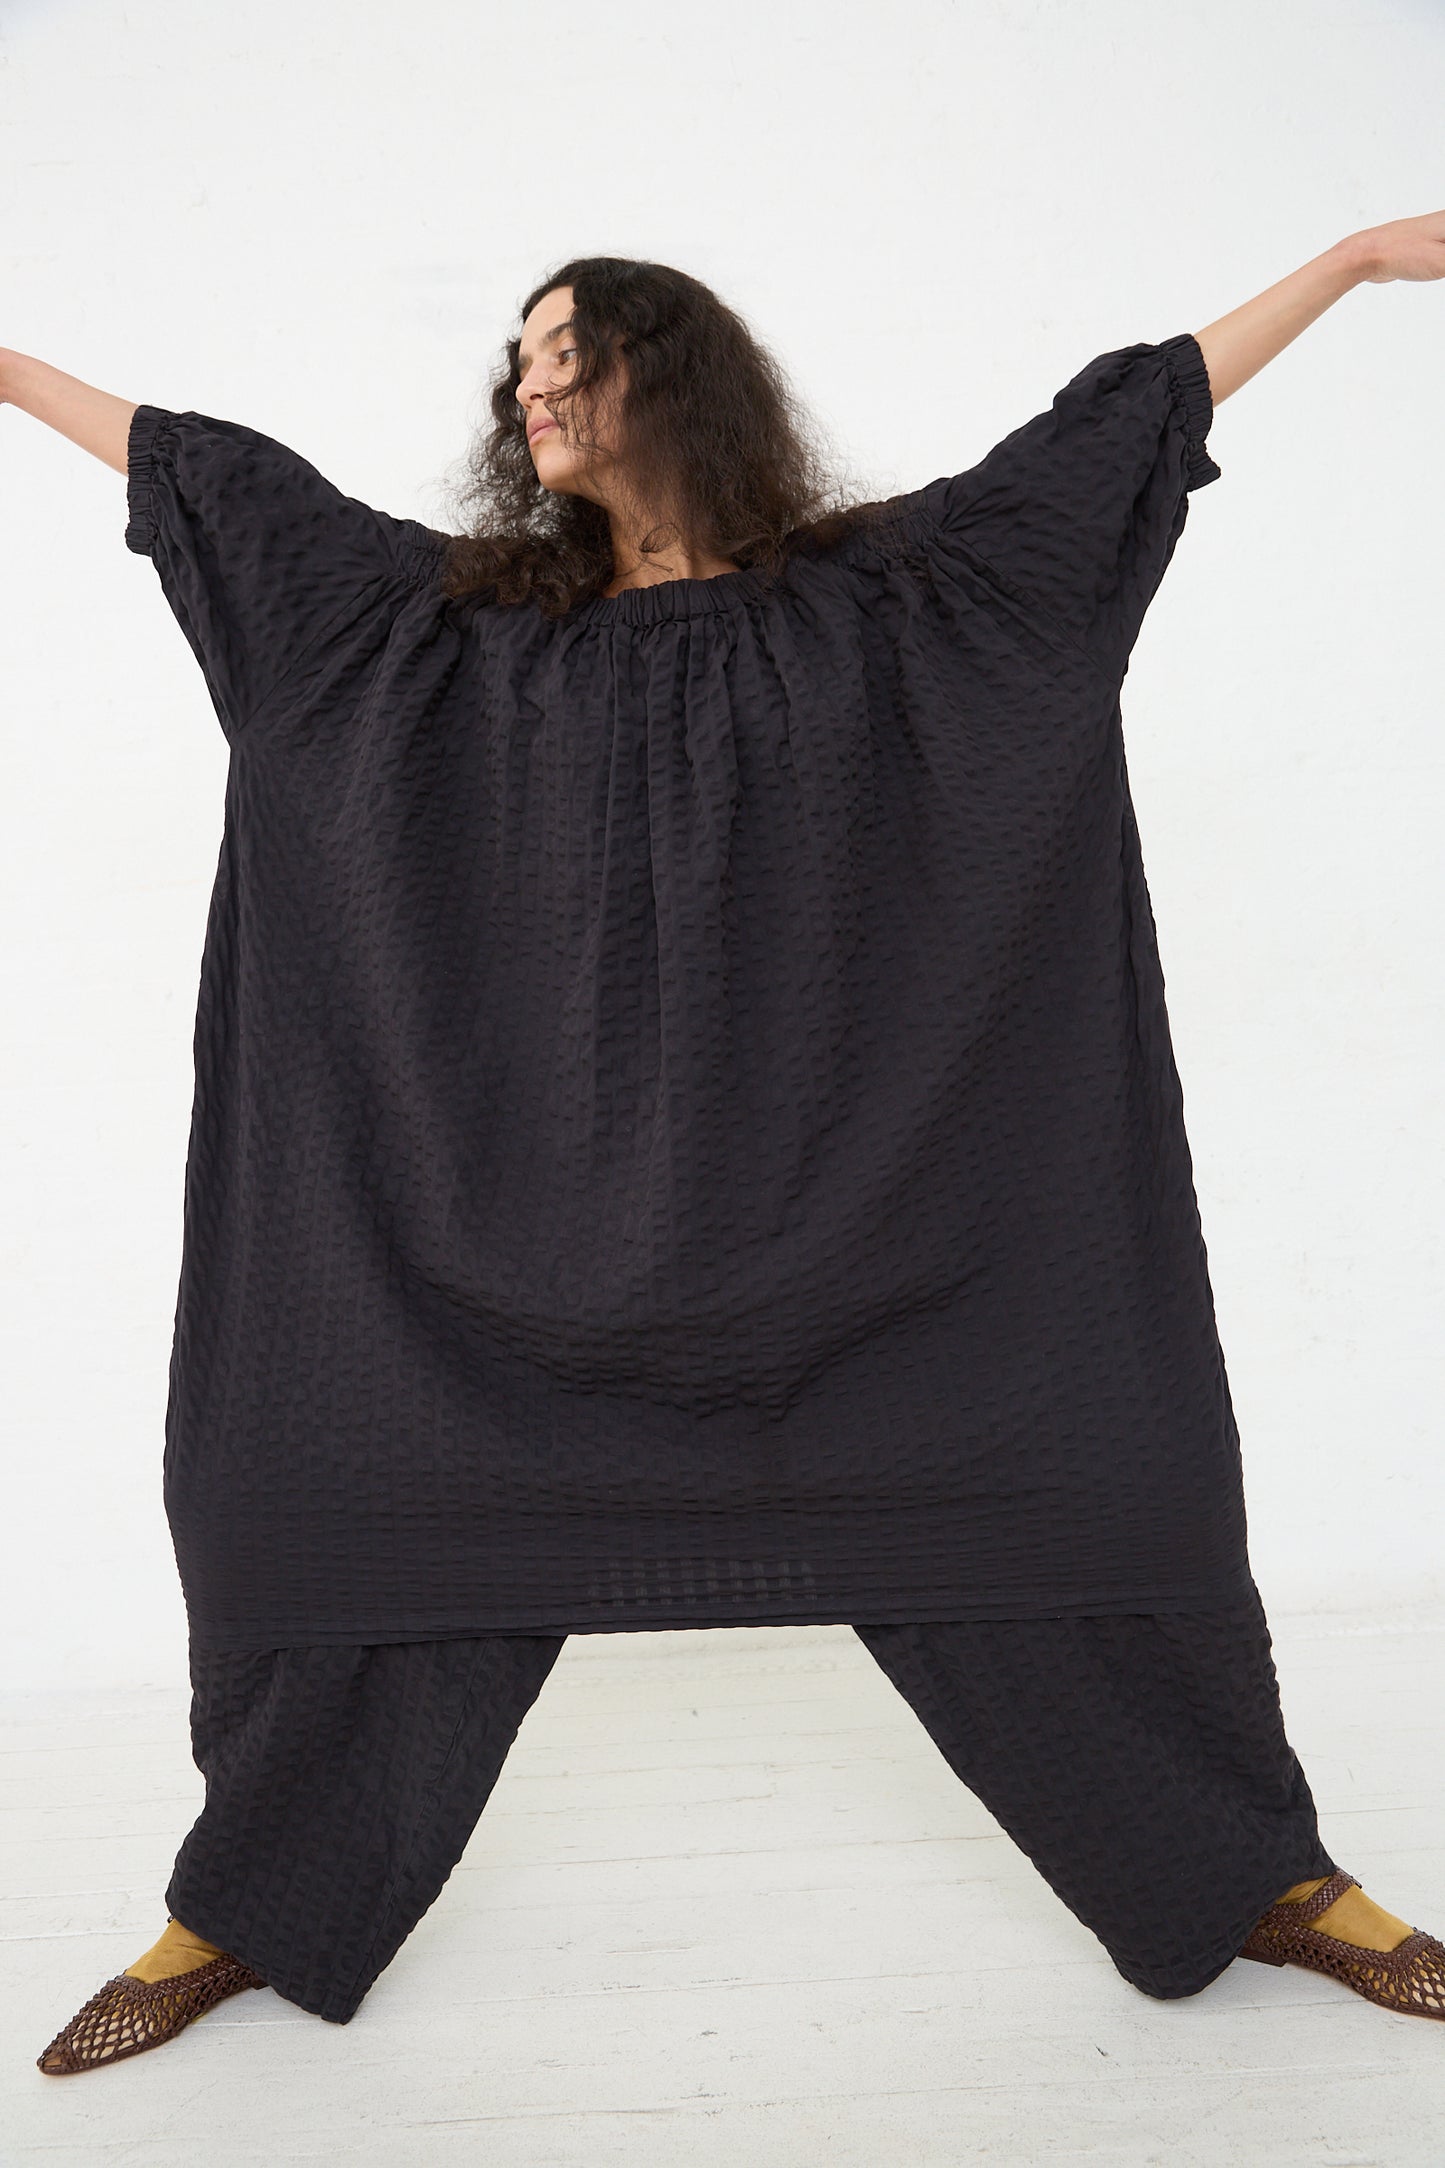 A person wearing an oversized Black Crane Cotton Seersucker Sack Dress in Ink Black with a ruched neckline and wide sleeves stands against a white background, arms outstretched to display the full breadth of the outfit.